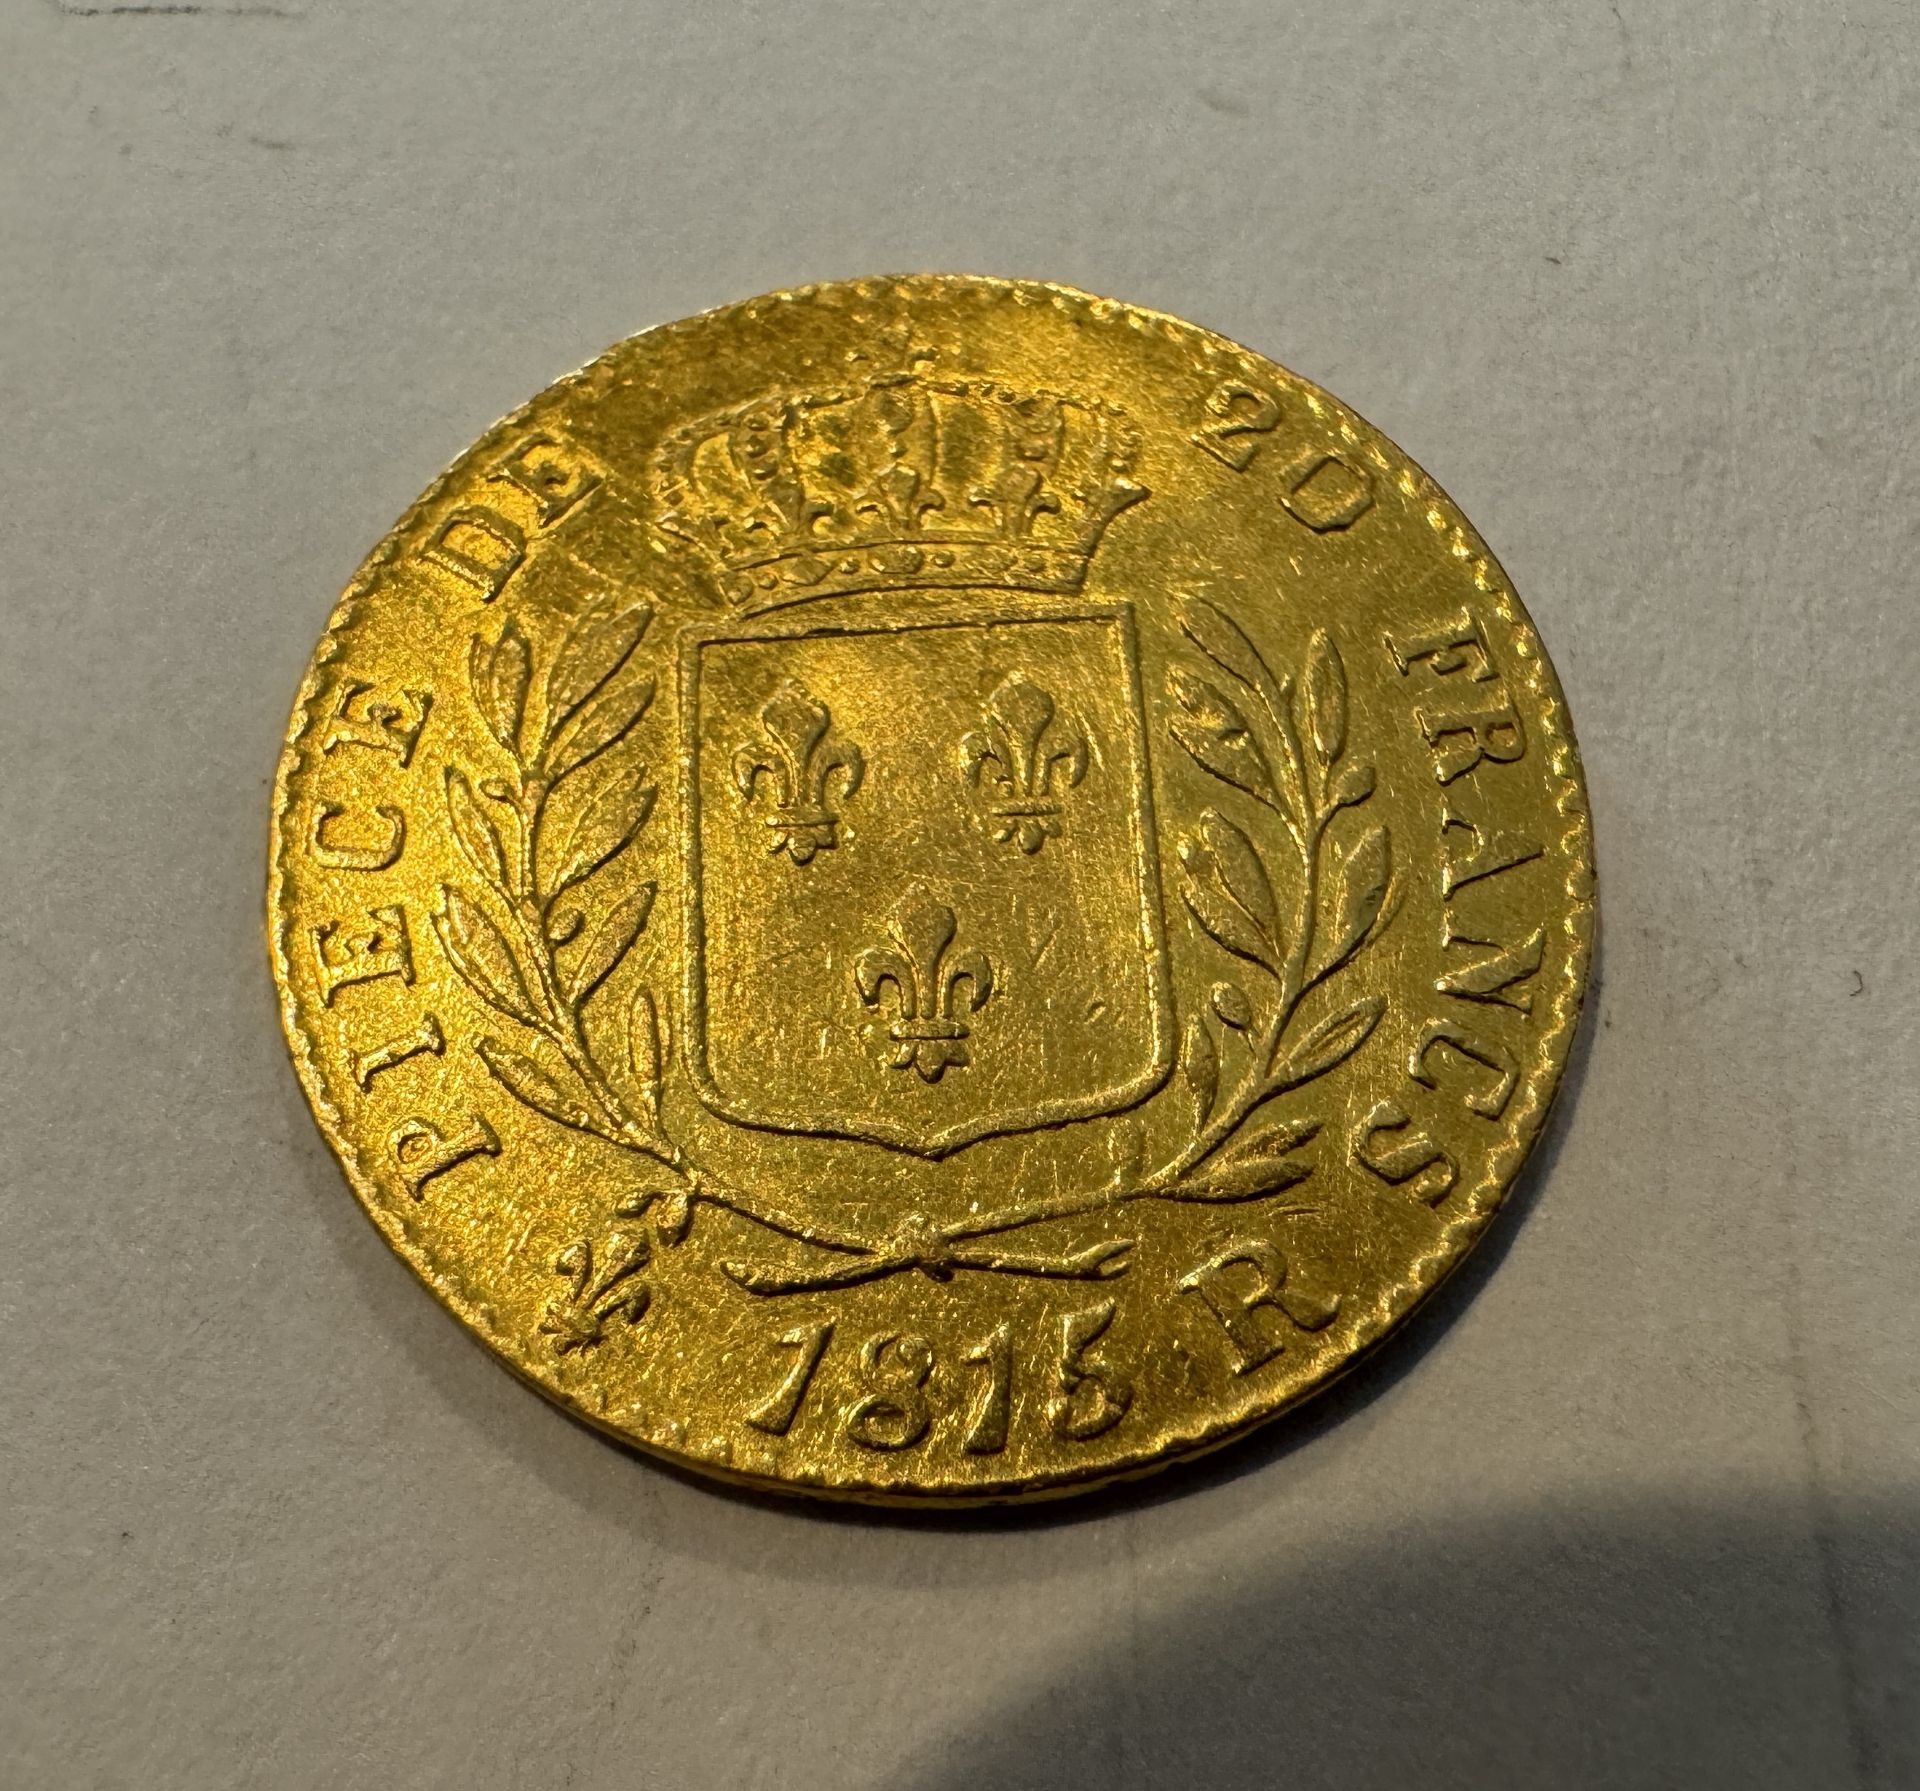 SOLID GOLD 1815-R 20 FRANC KM-X1 BRITISH GOVERNMENT COIN